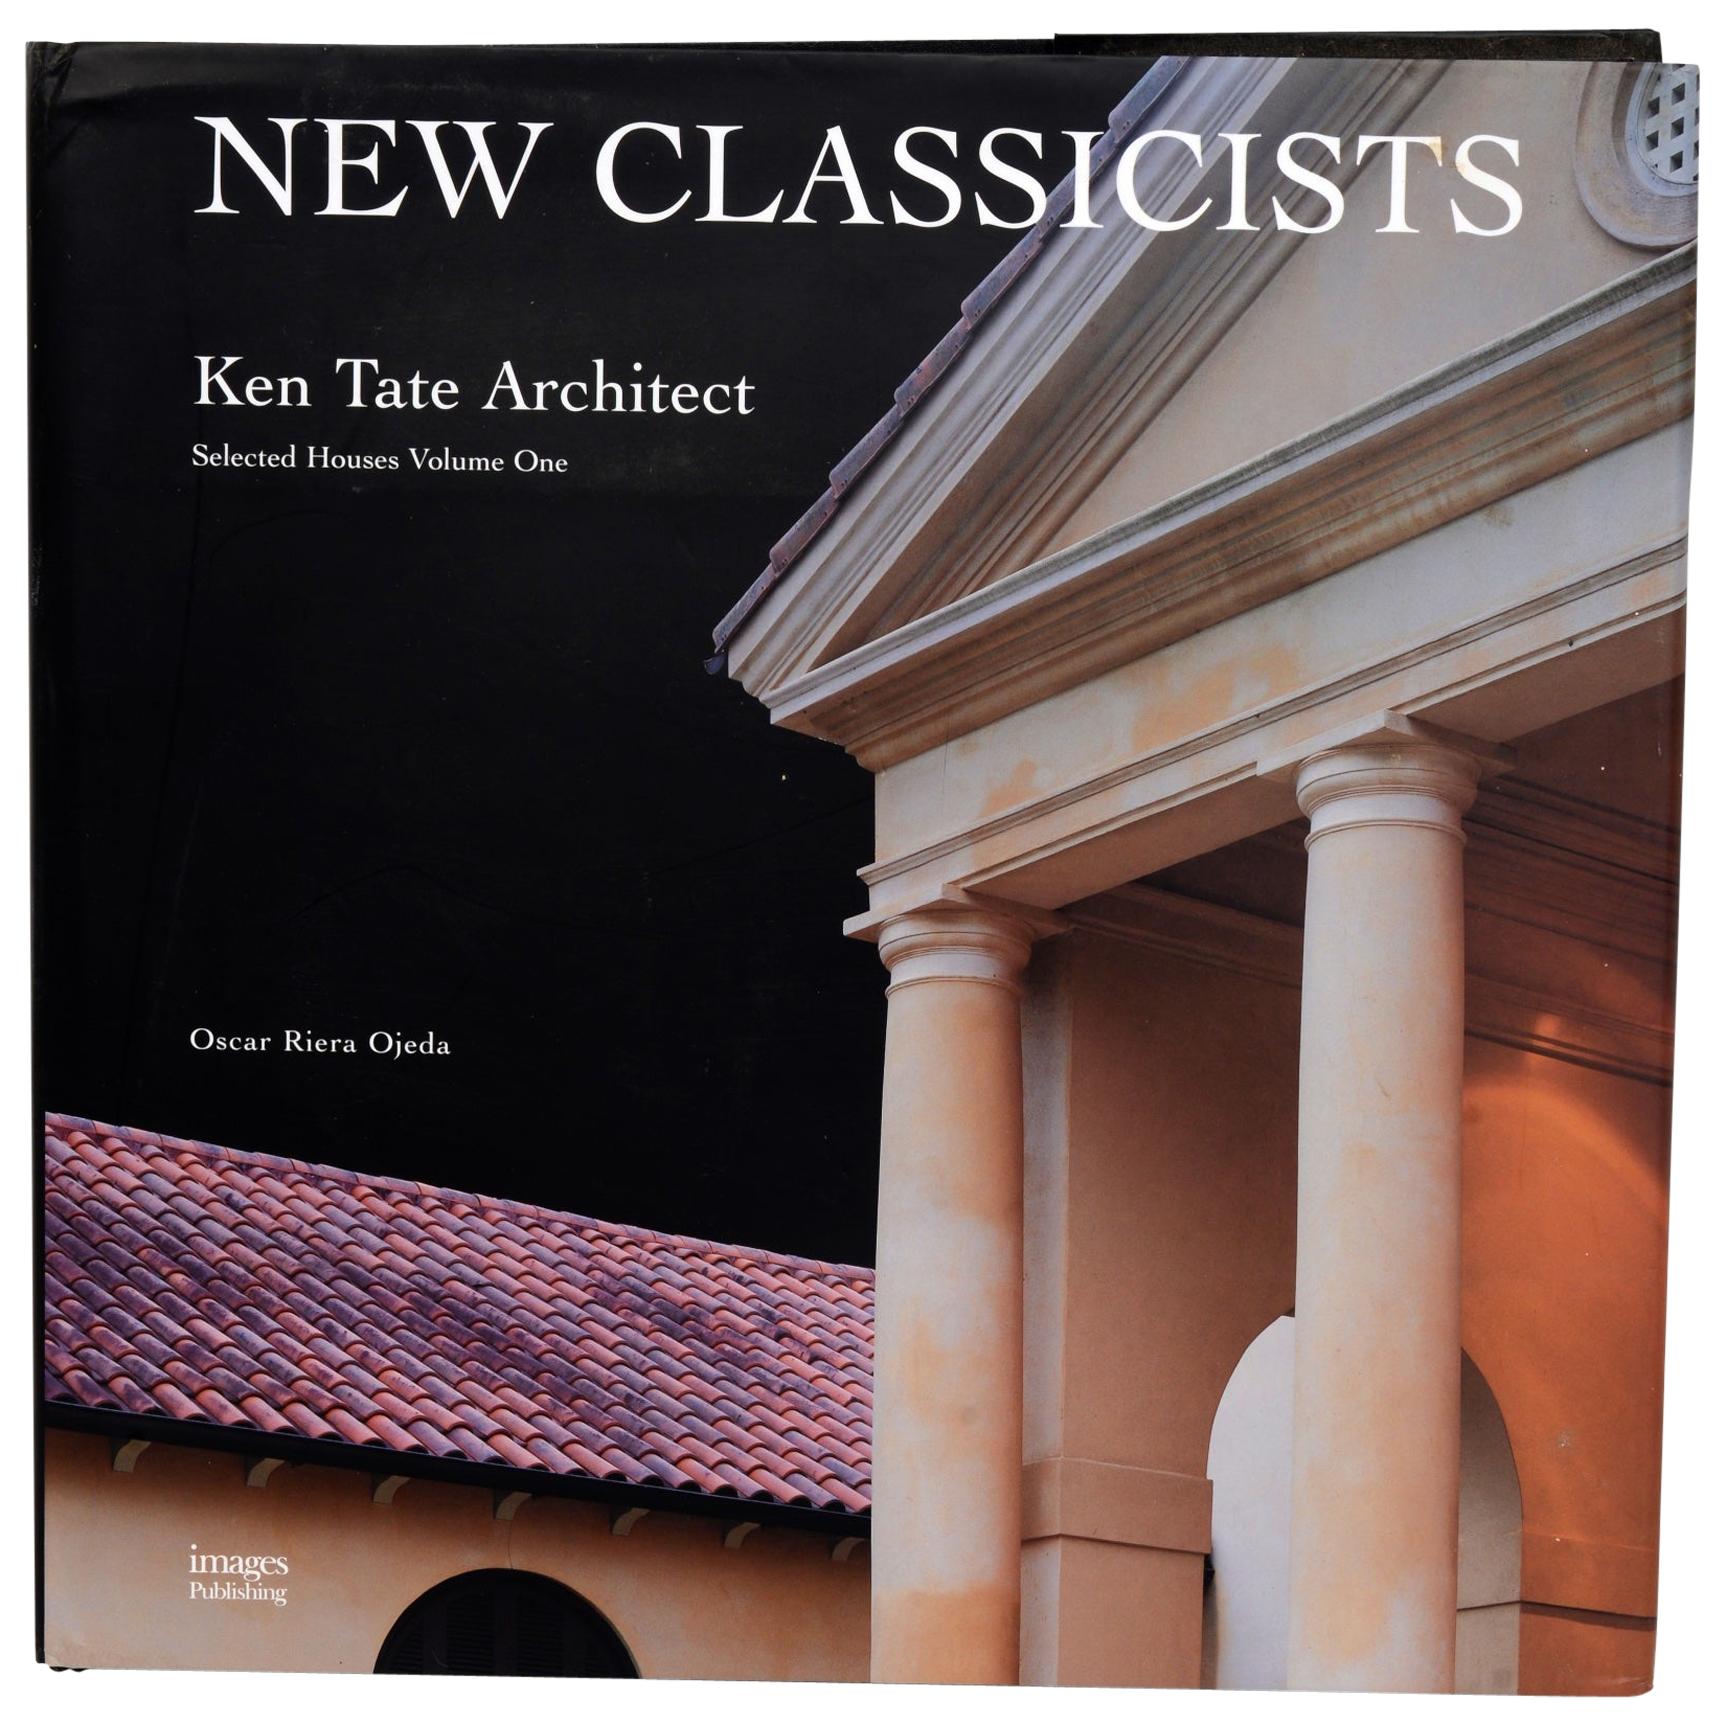 New Classicists, Ken Tate Architect, Volume 1, Selected Houses, First Edition